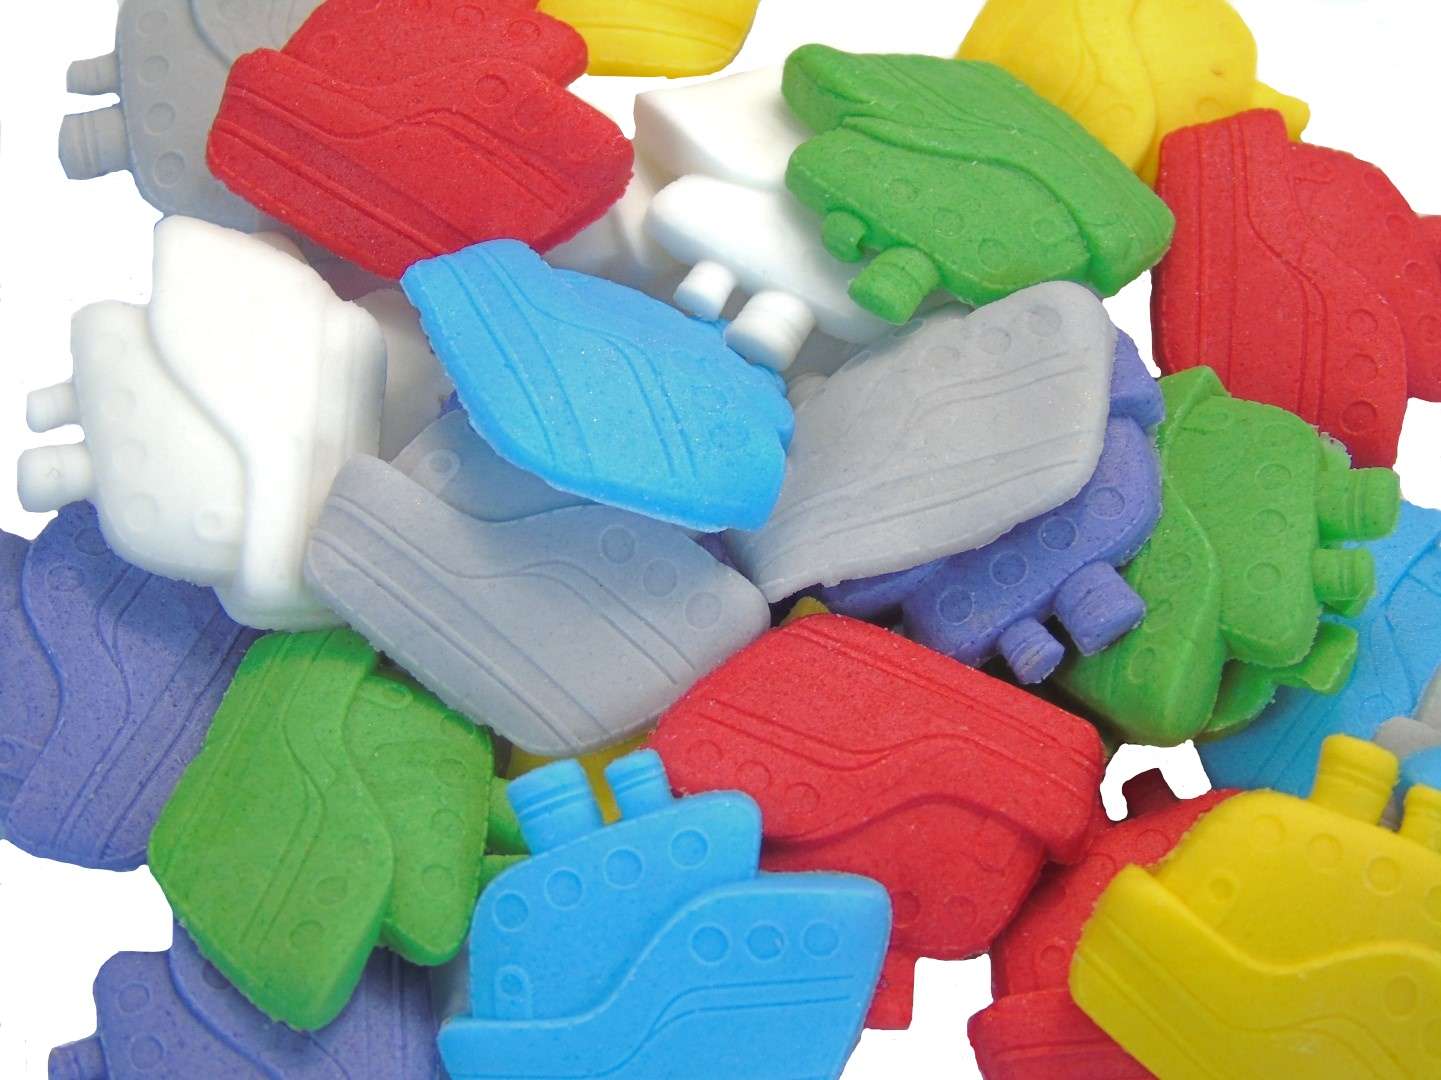 If you’re looking for some cupcake confetti decorations in the shape of ships? Then we know these are sure to please and a great hit at parties A colourful selection of novelty edible ships. Approx Size: 3cm to 2.5cm Available in a mix of red, blue, yellow, green, grey, purple and white    